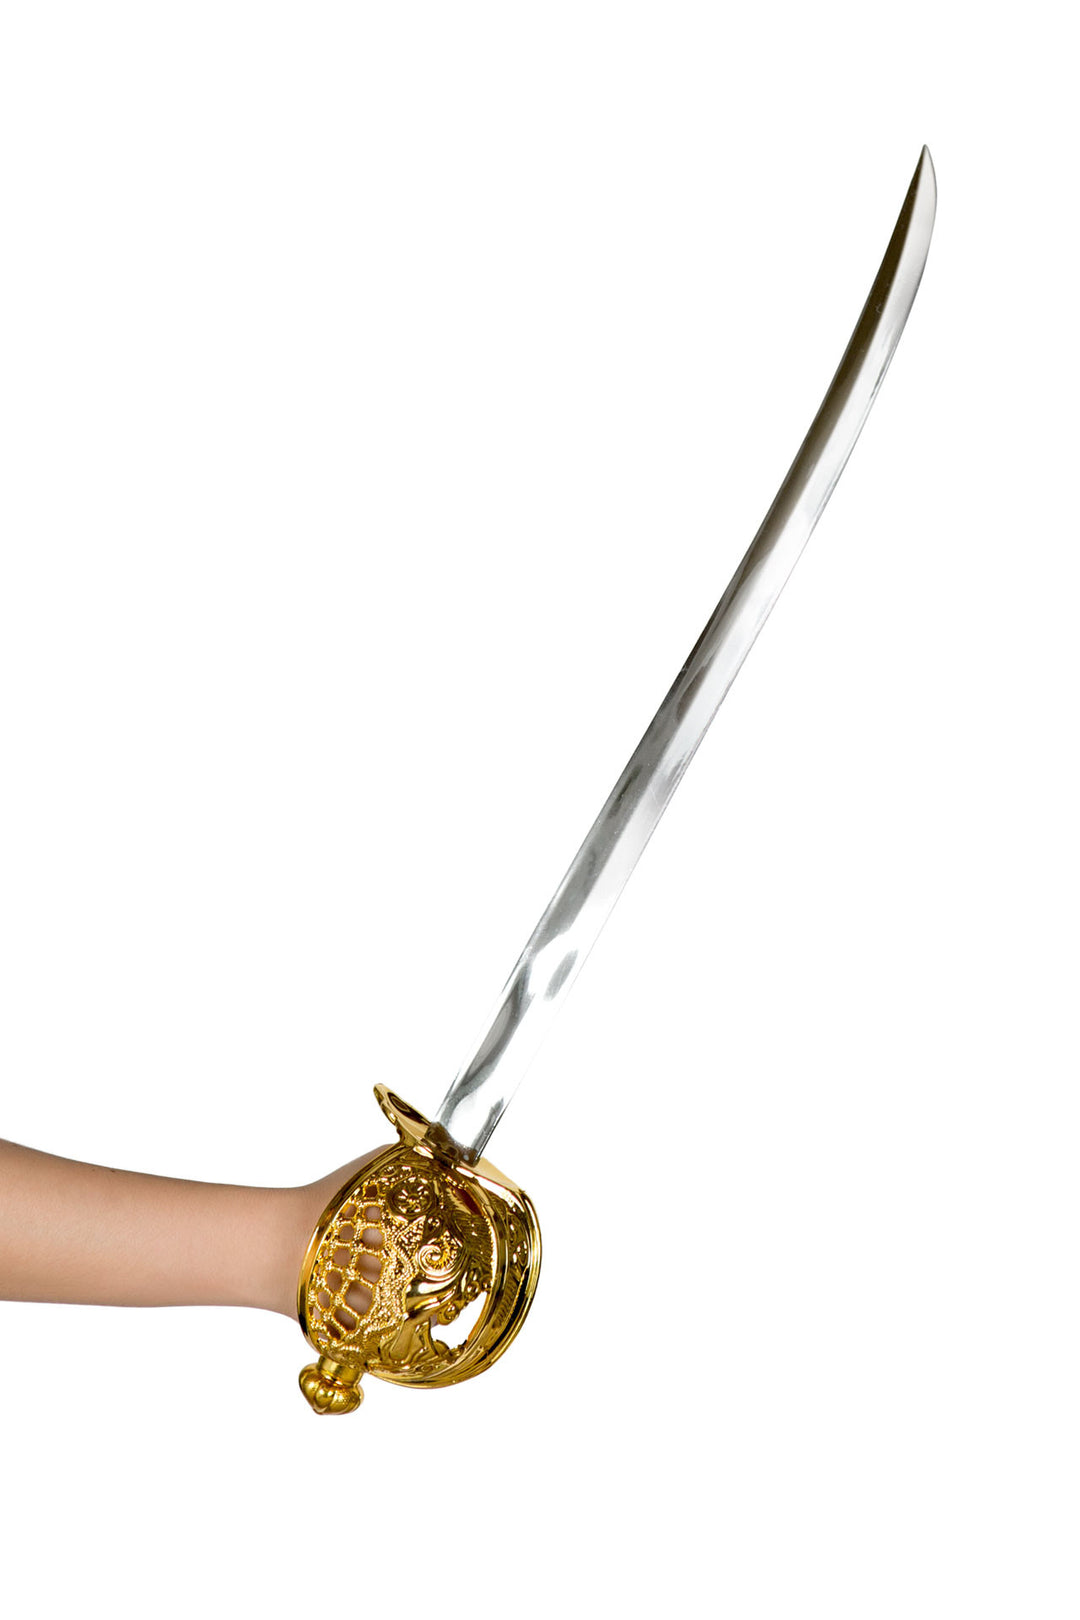 4693 - 25" Pirate Sword with Round Handle